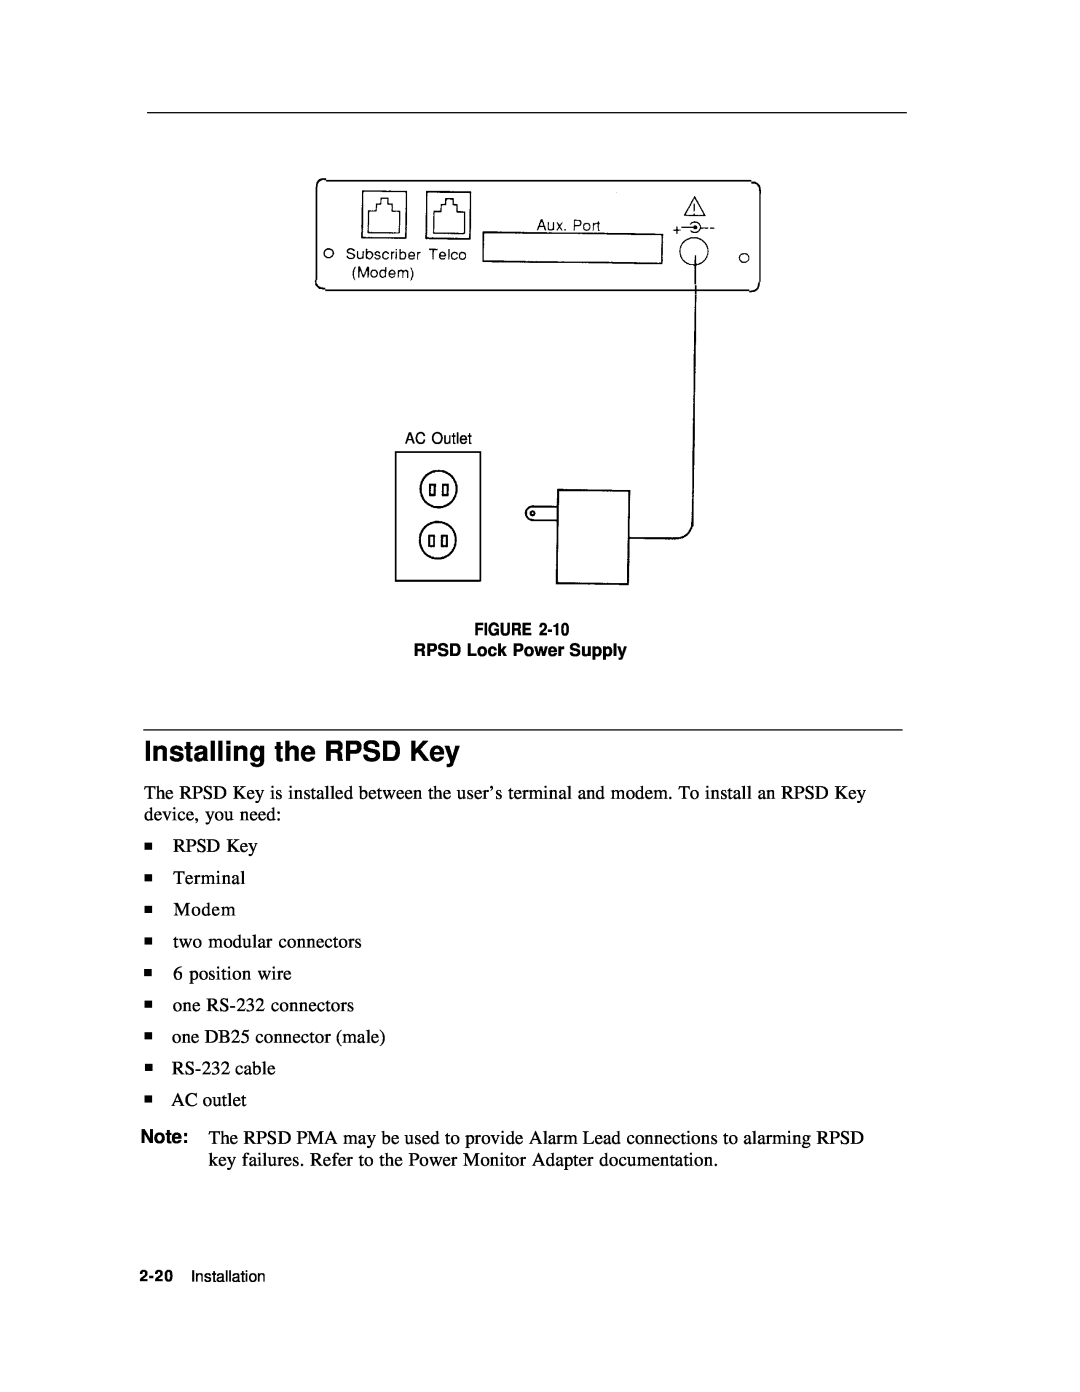 AT&T Remote Port Security Device user manual Installing the RPSD Key 